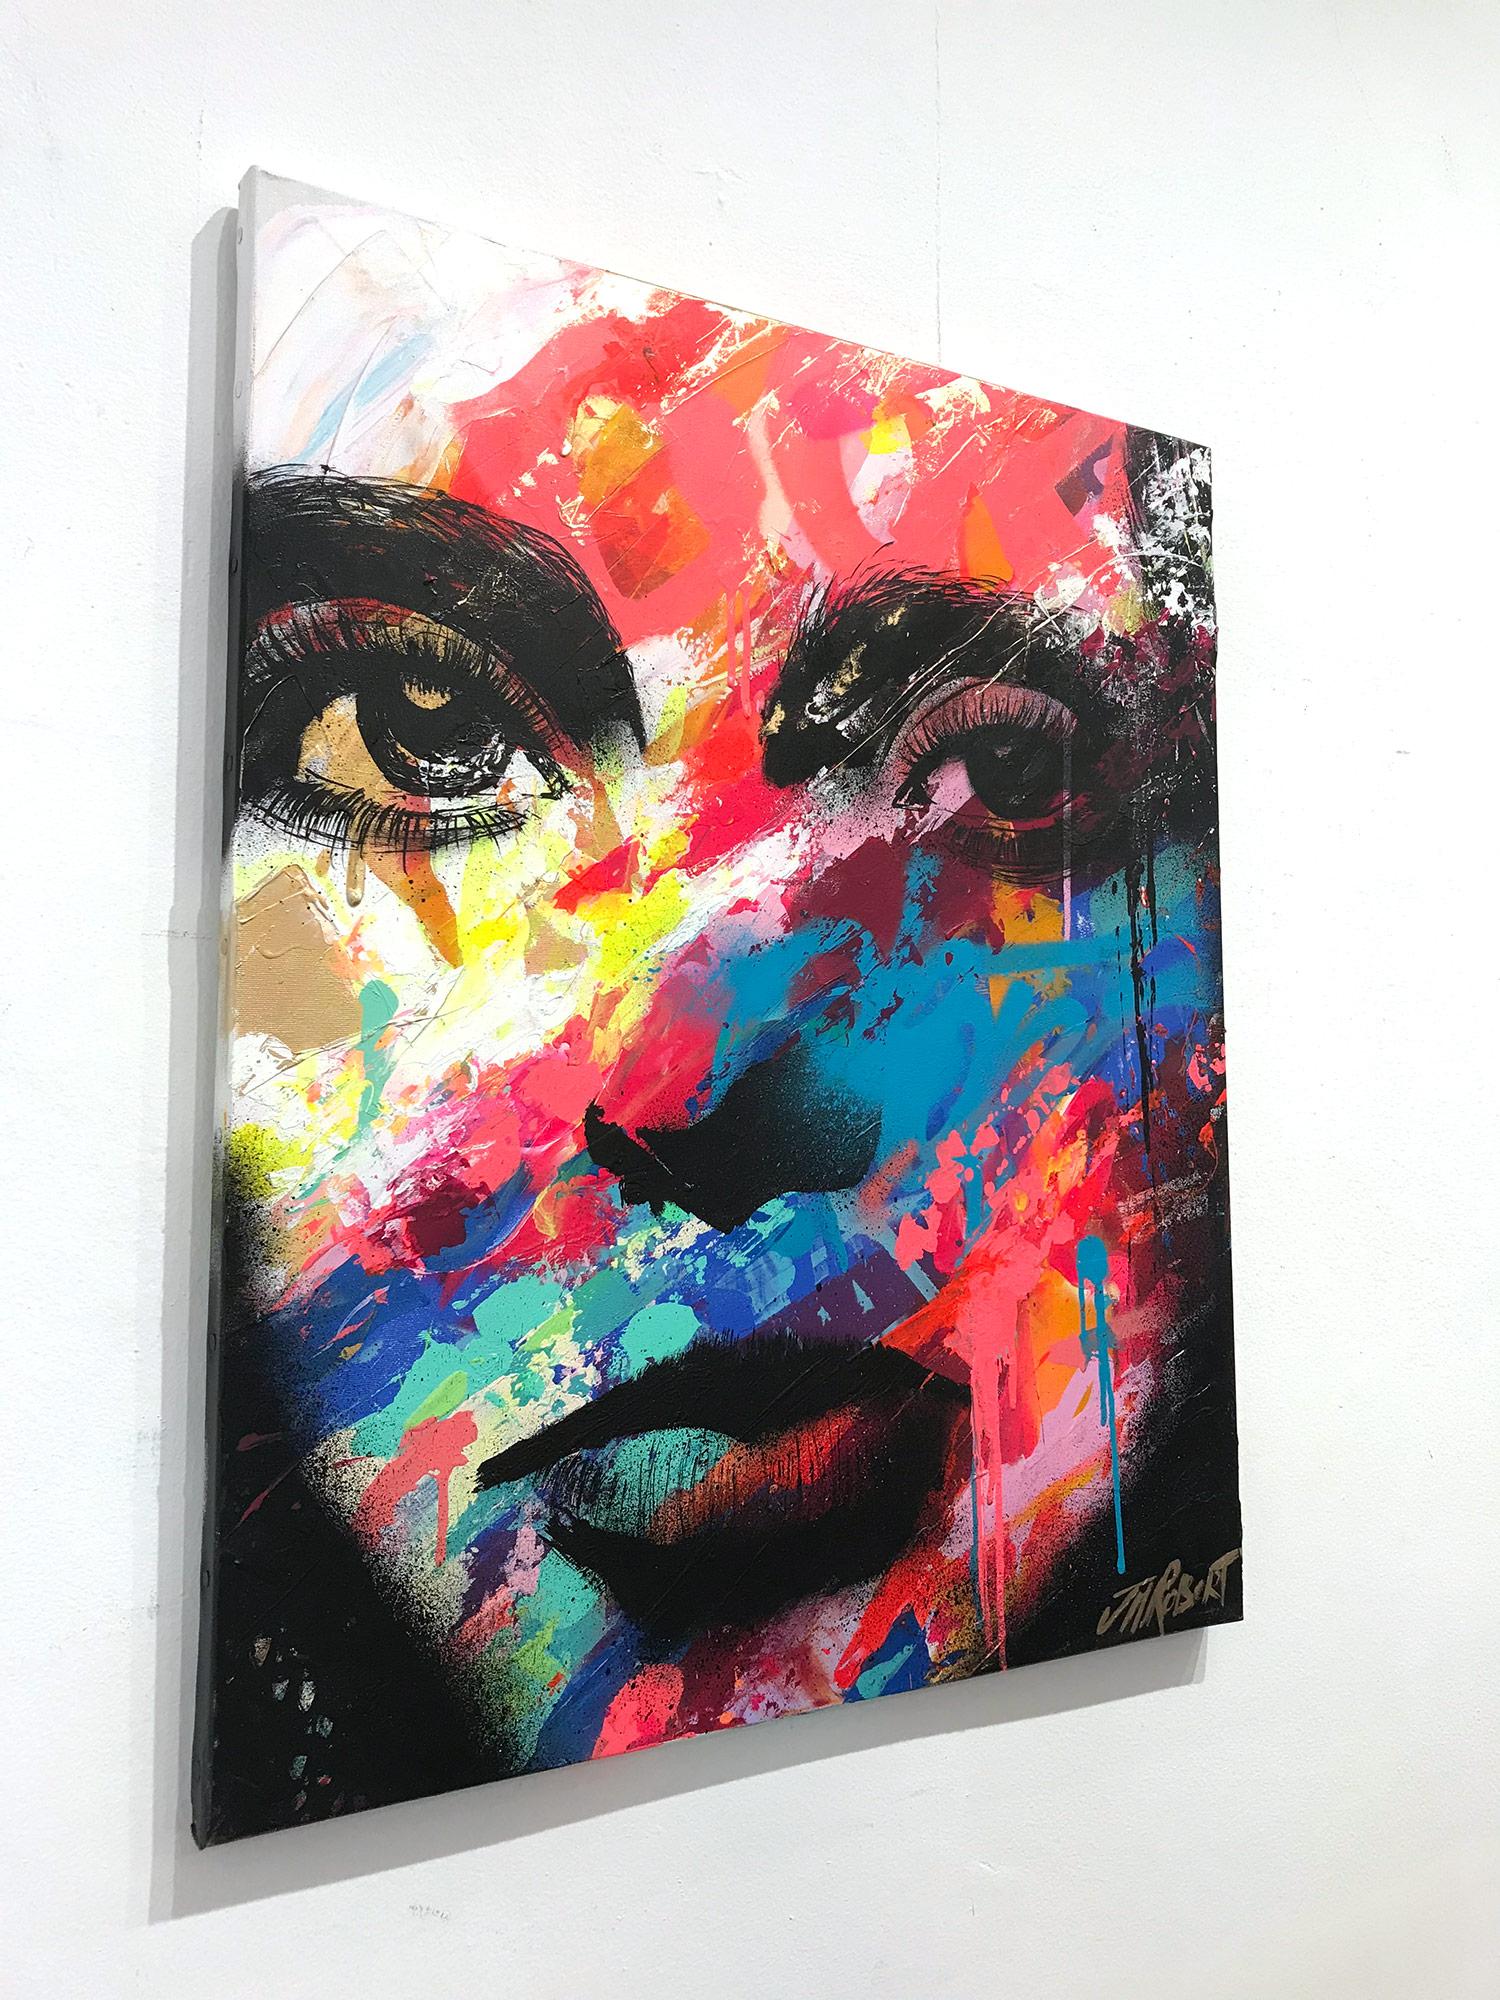 “Elle Fait Face” She Faces, Colorful, Abstract Street Art, French Artist 3